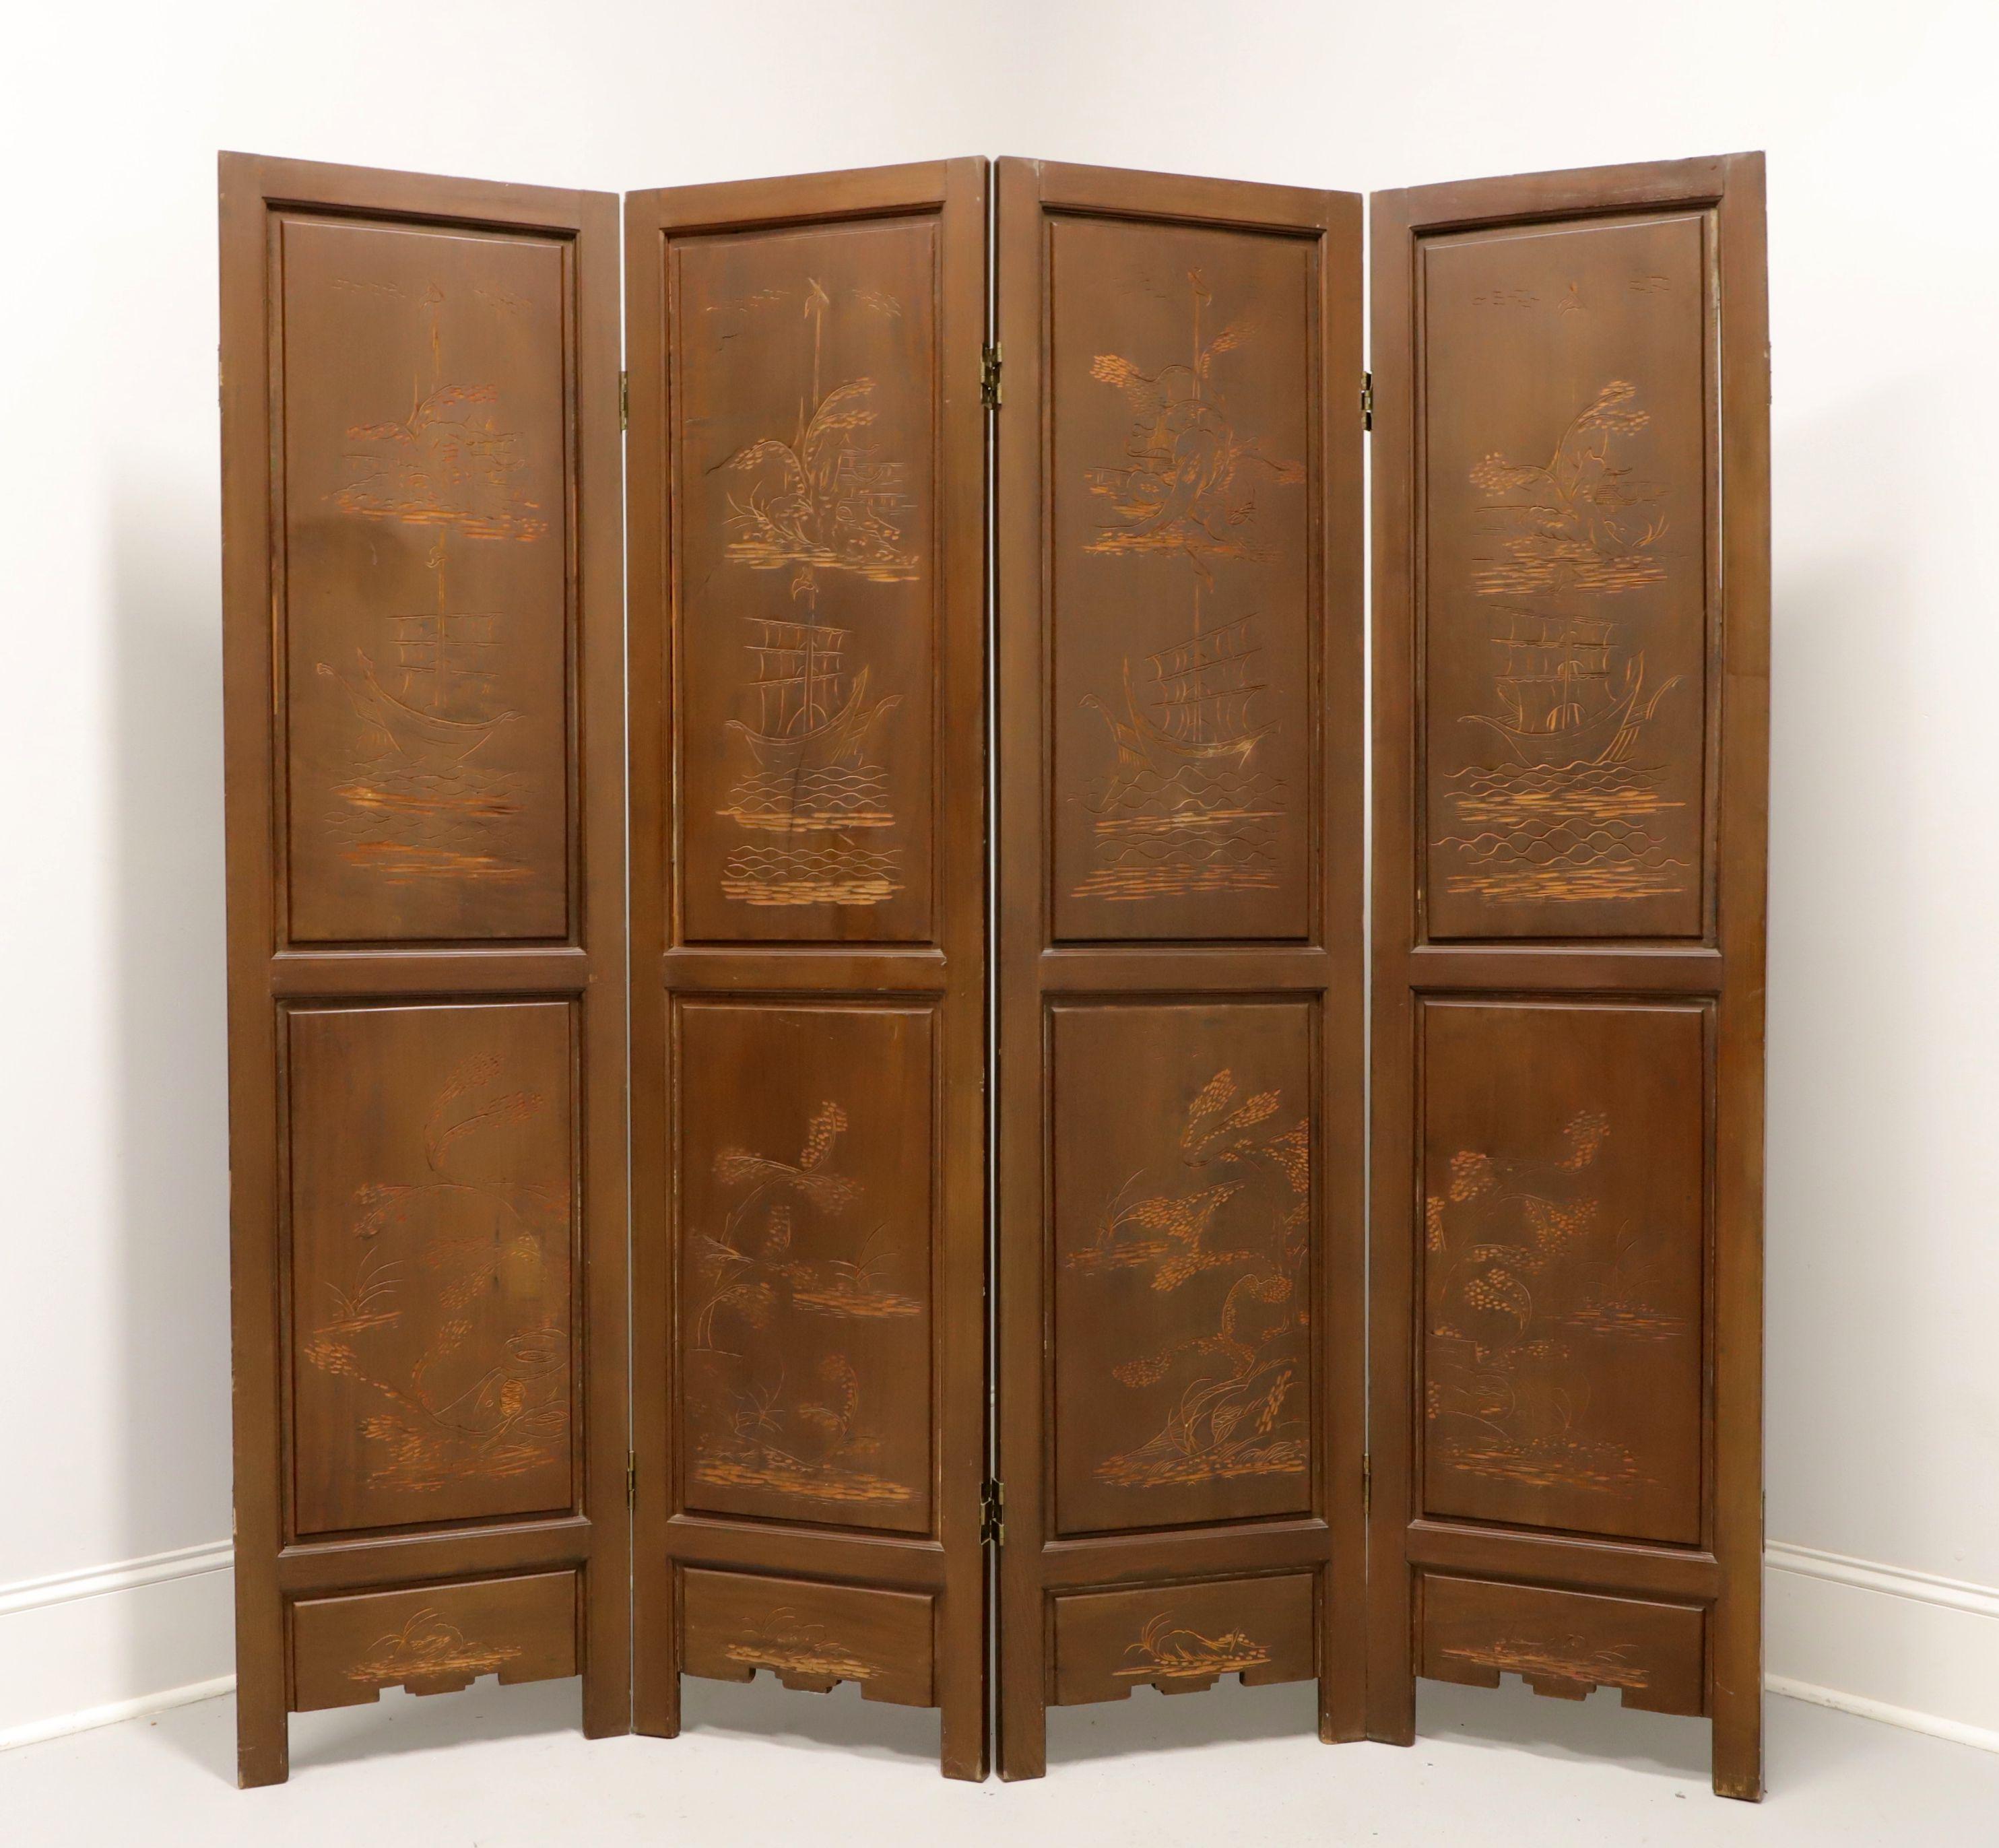 A handcrafted Balinese four-panel room divider screen, artisan unknown. Solid teak with front side being carved out of and reverse side being carved into the teak. Twelve individual panels with intricate detail & workmanship framed together to form